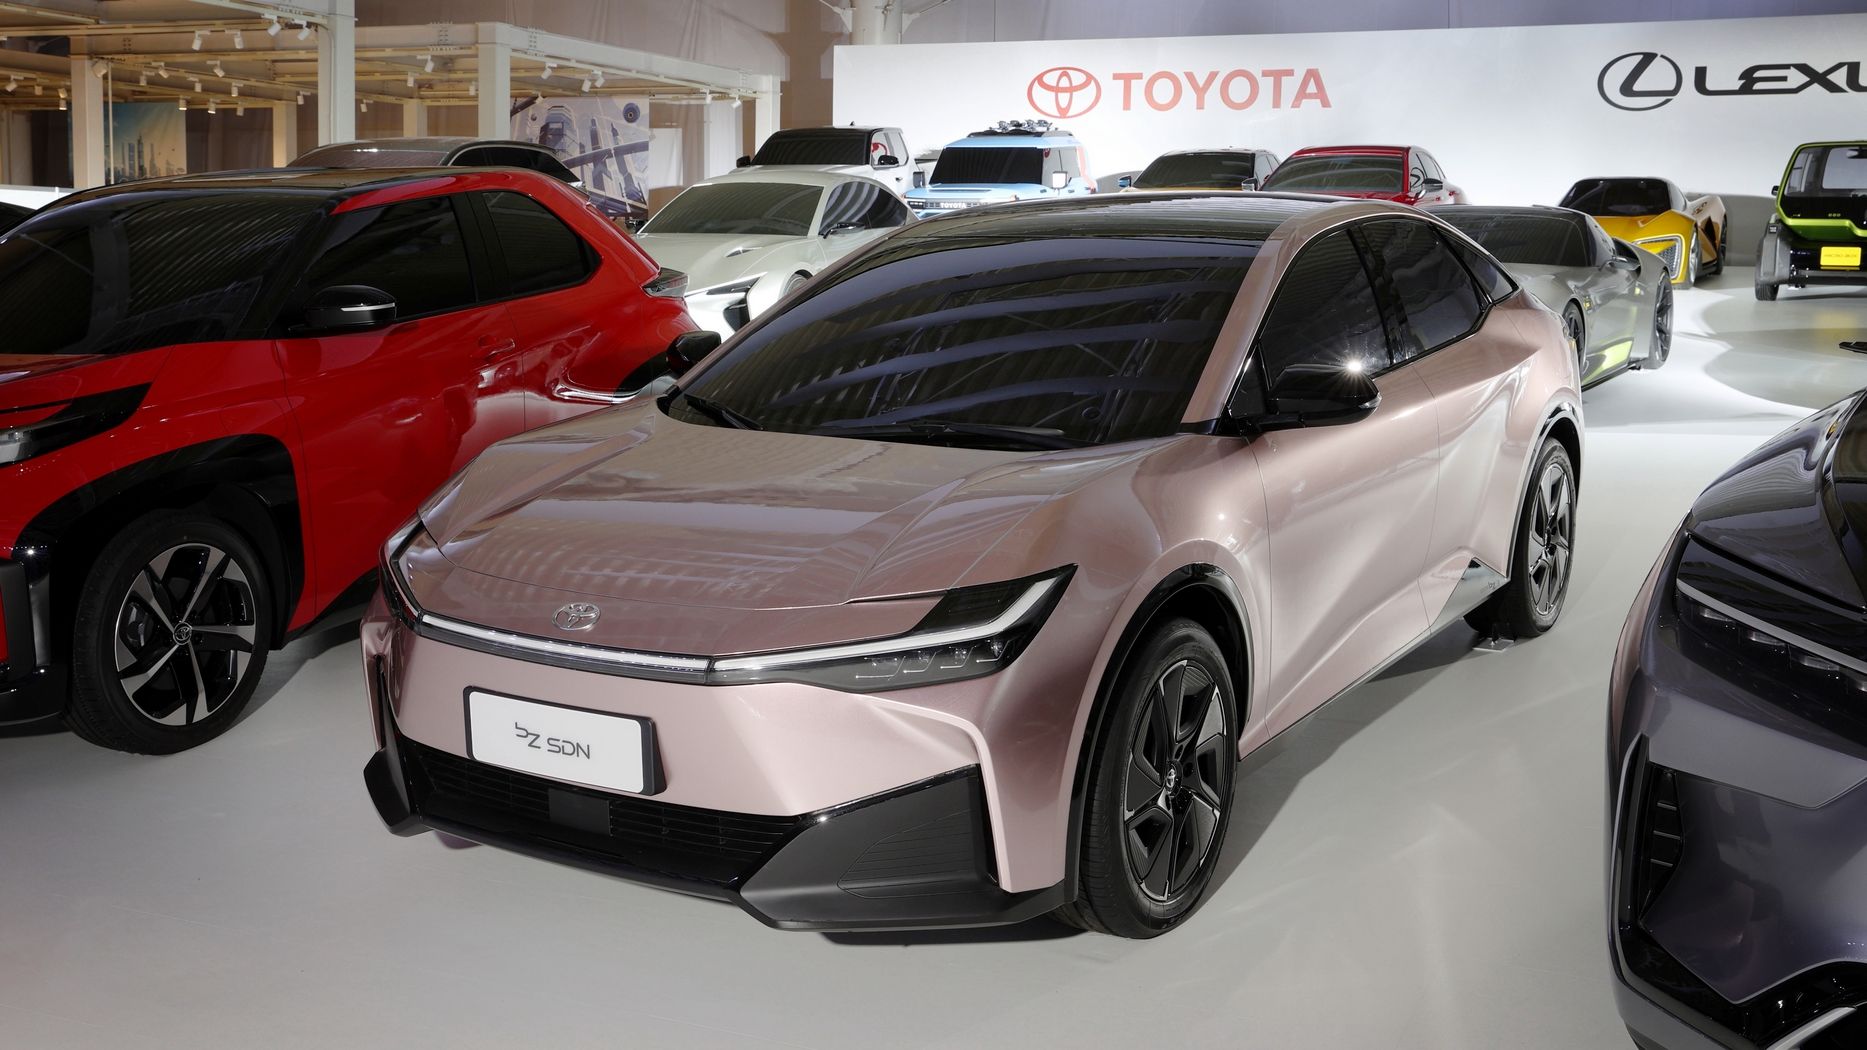 0cee7eac-1f24-43d0-8560-bc5404f7d9b1-this-is-probably-the-electric-corolla-toyota-will-build-with-byd-176504_1.jpg